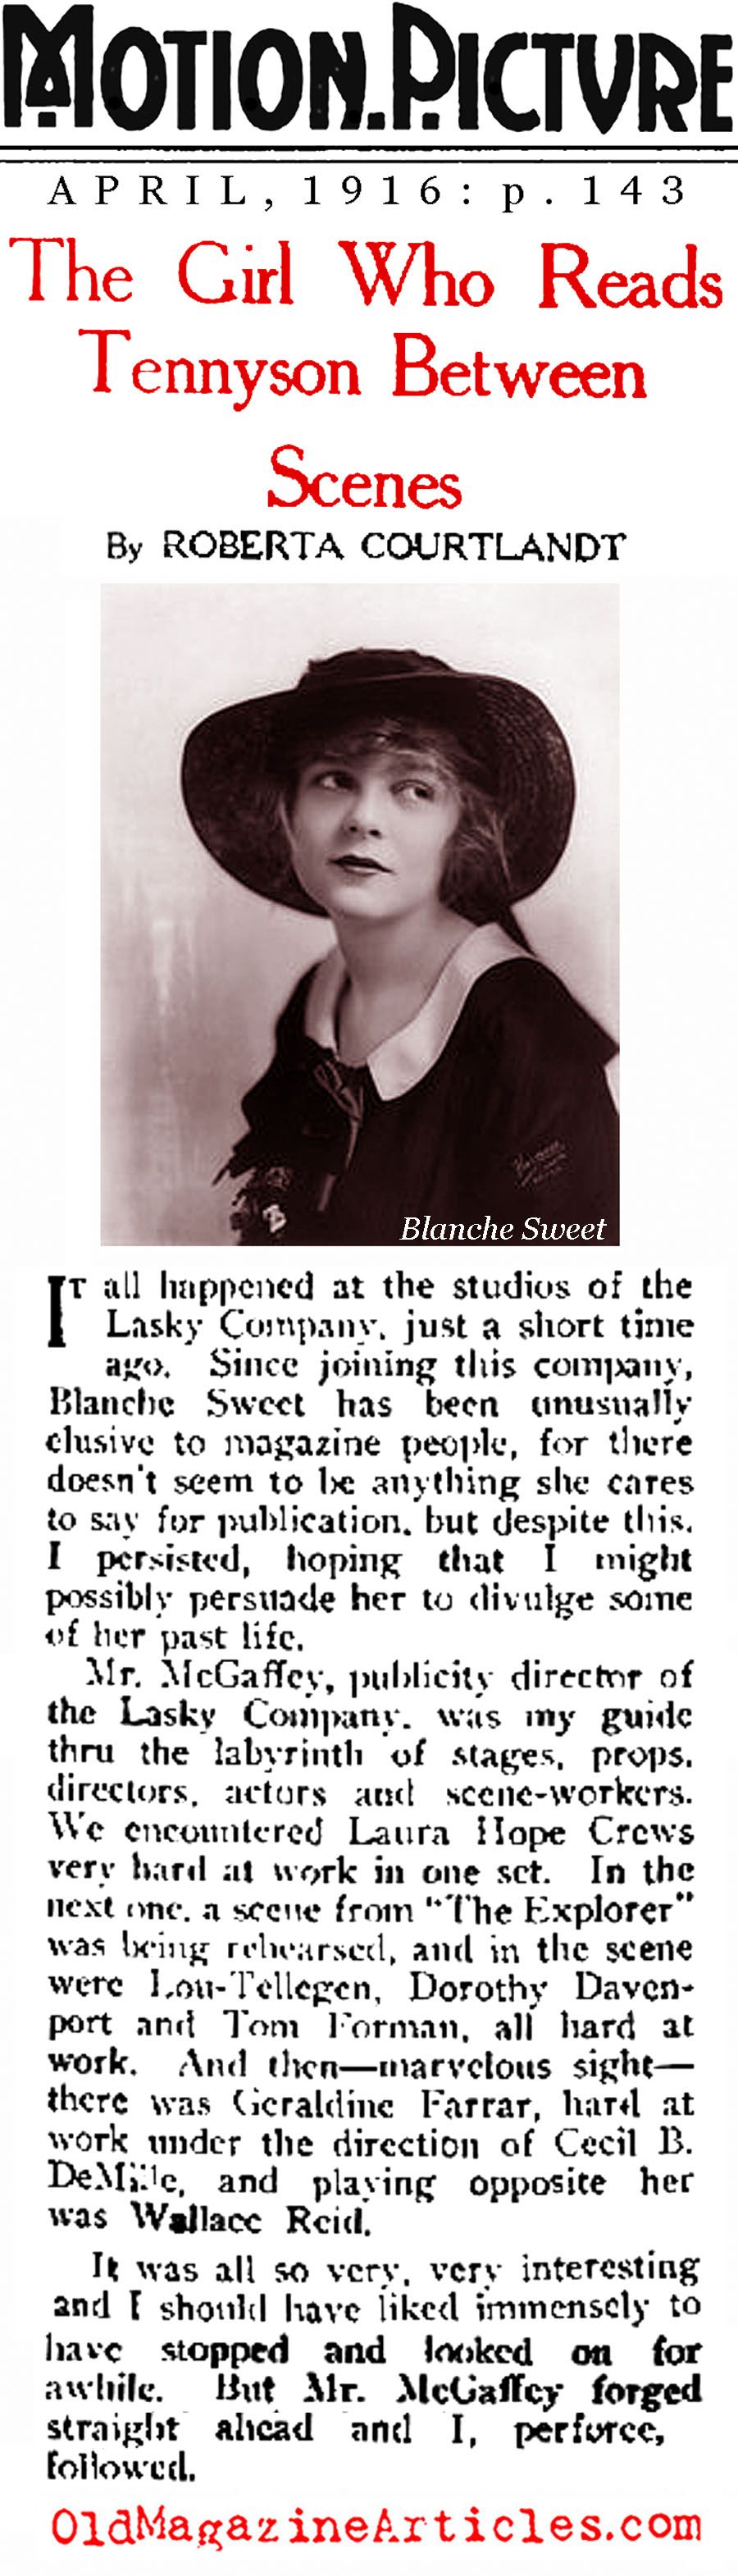 Blanche Sweet Interviewed   (Motion Picture Magazine, 1916)